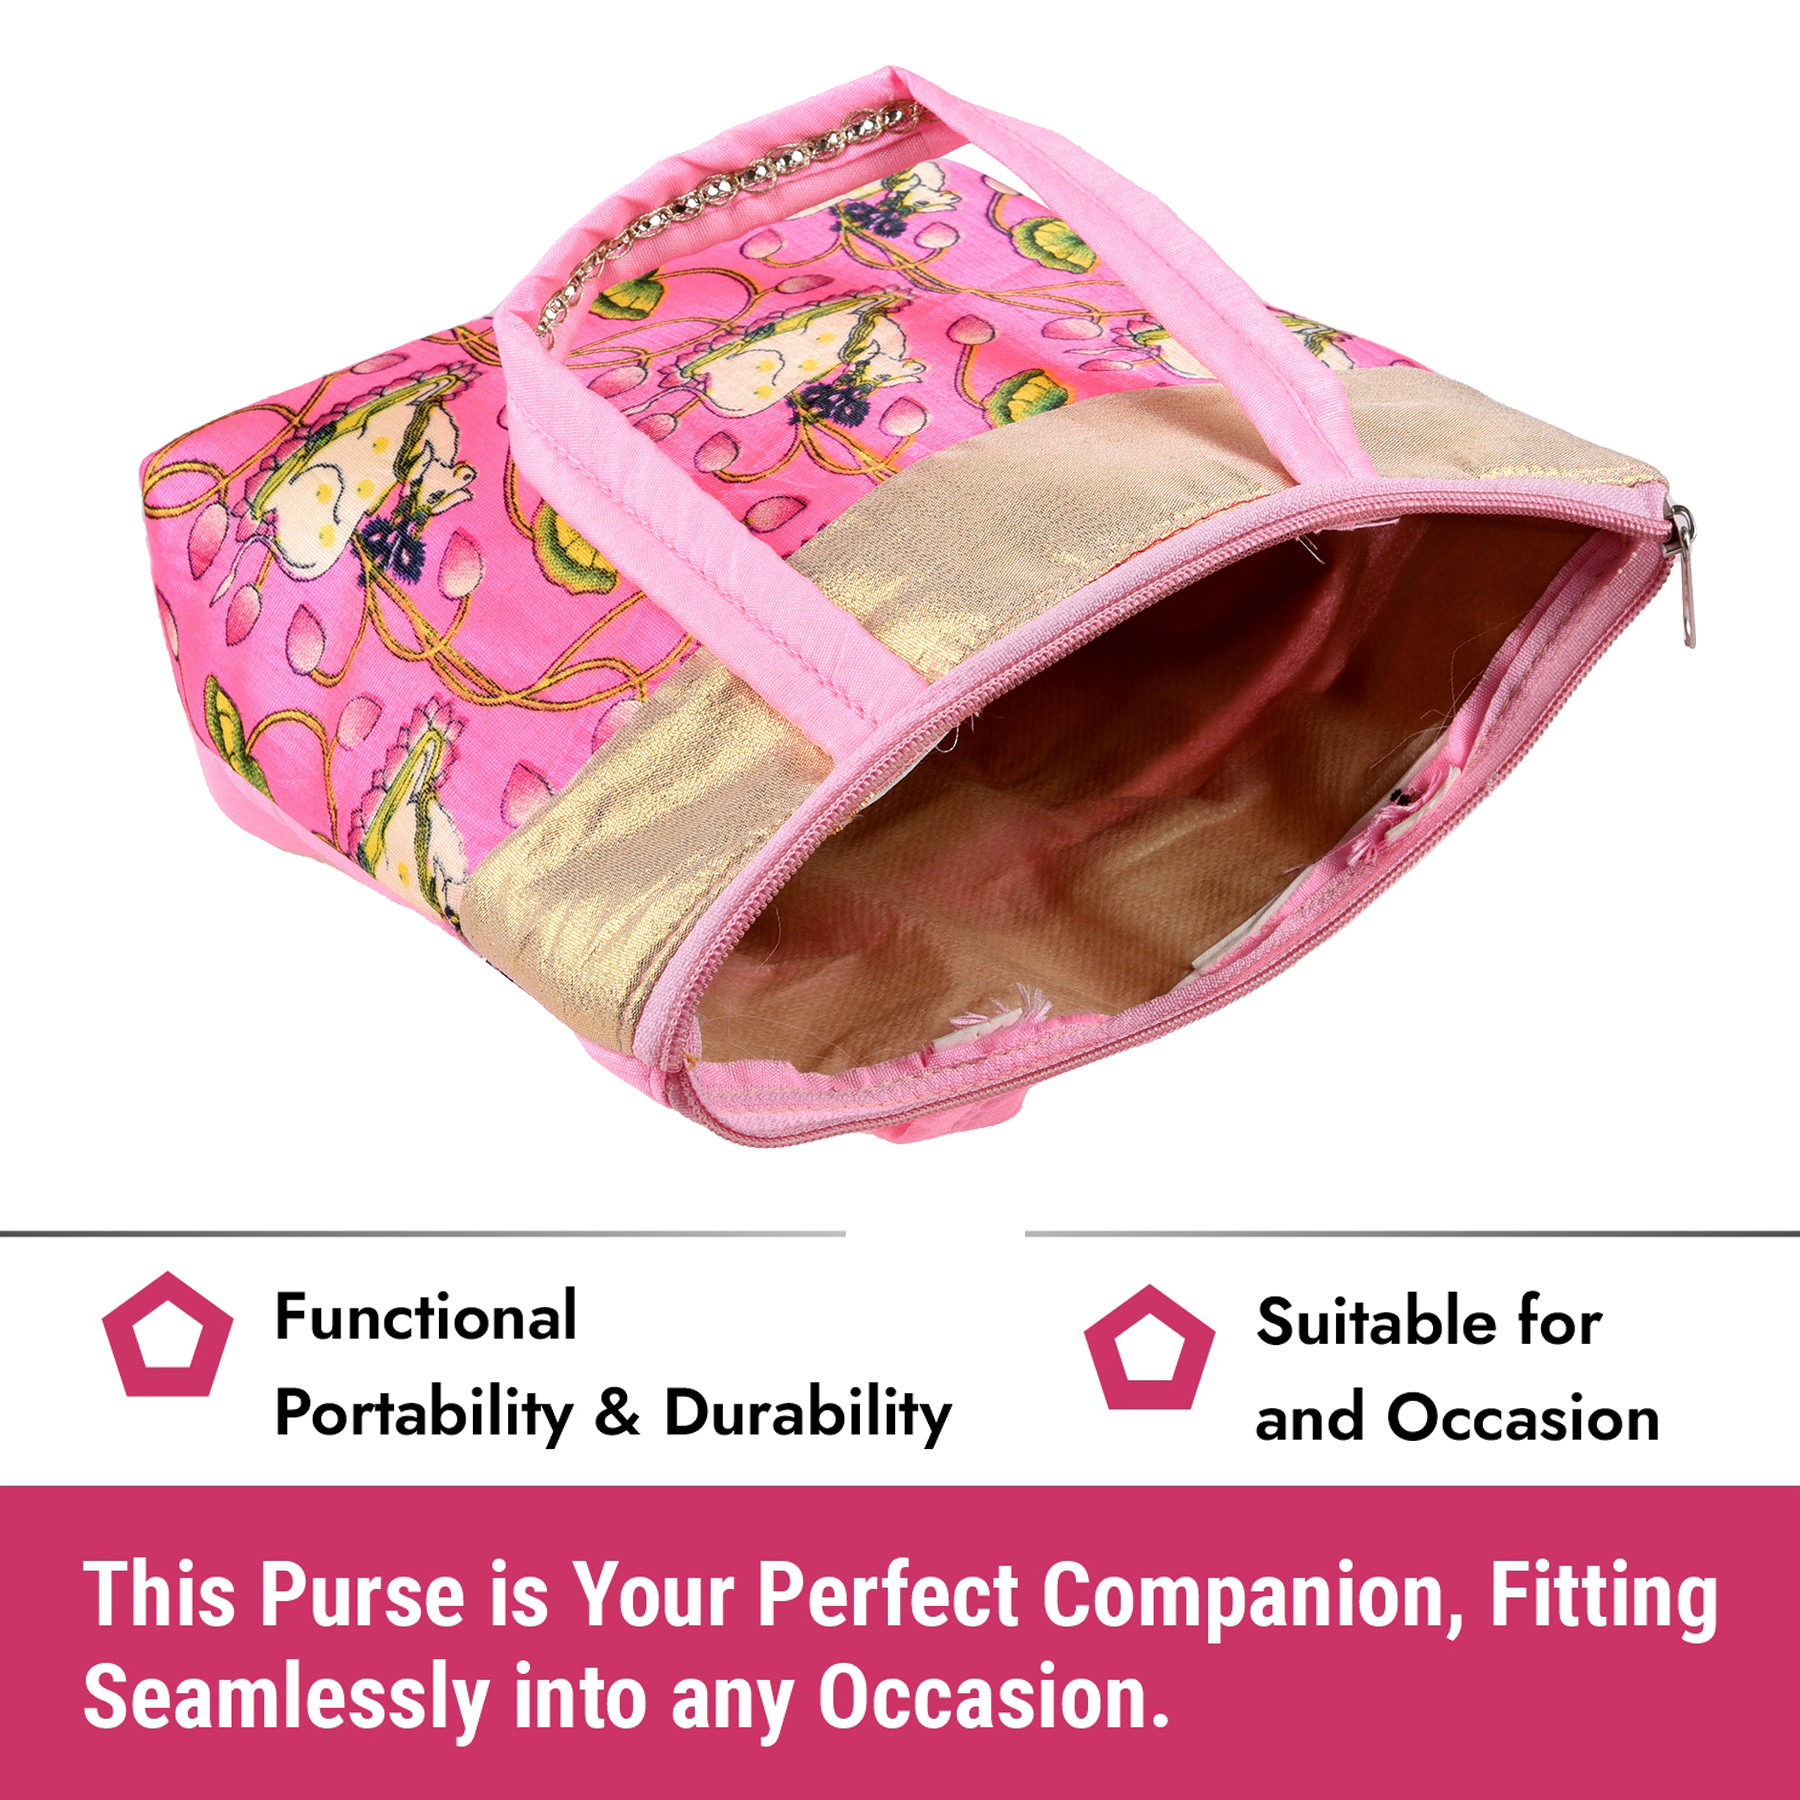 Kuber Industries Hand Purse | Traditional Mini Hand Bag | Silk Wallet Hand Bag | Shagun Hand Purse | Woman Tote Hand Bag | Gifts Hand Bag | Cow-Small Hand Purse | Pack of 4 | Multi